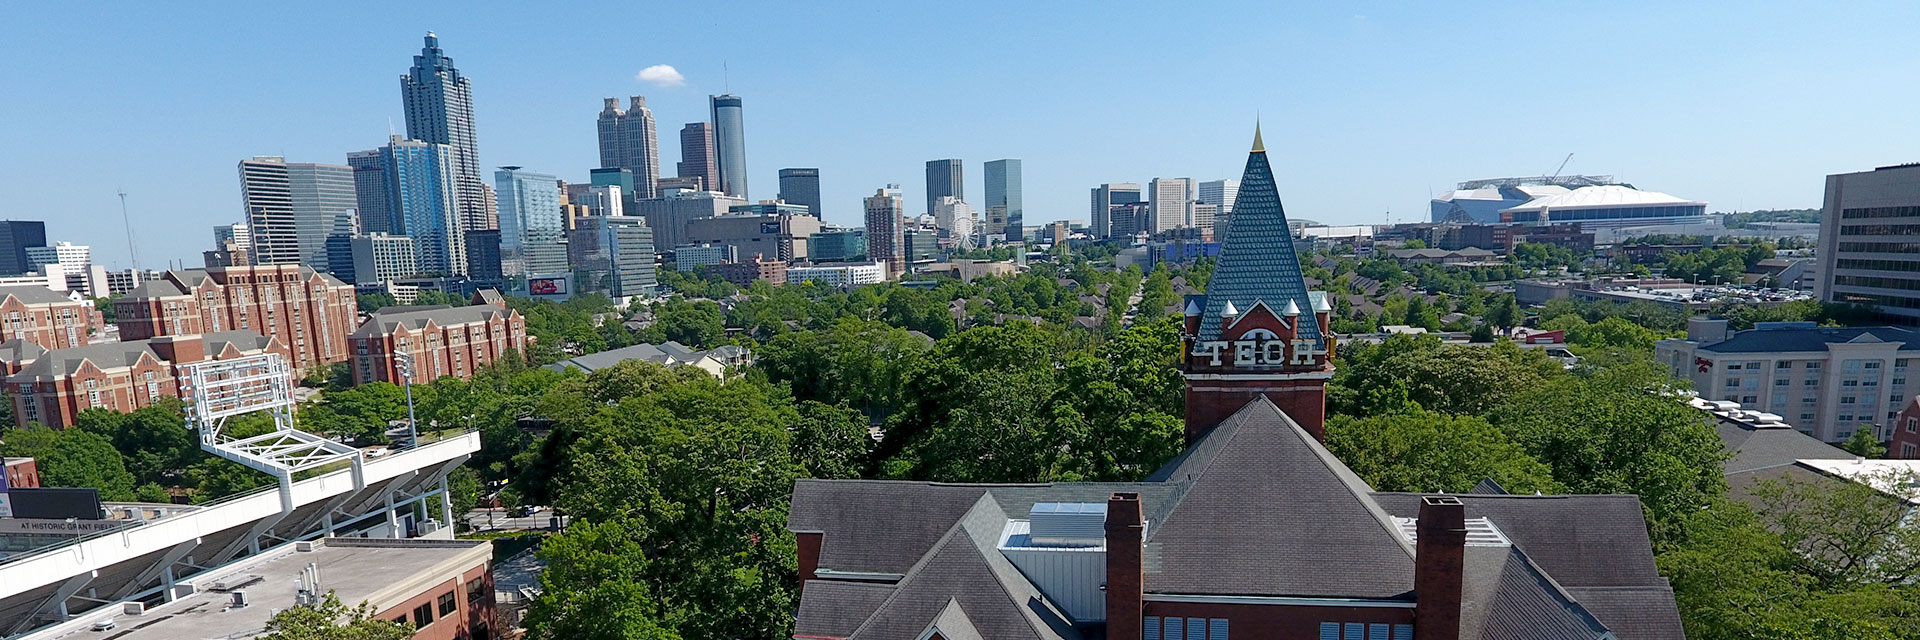 Wide shot of Georgia Tech campus with Atlanta skyline in the background.